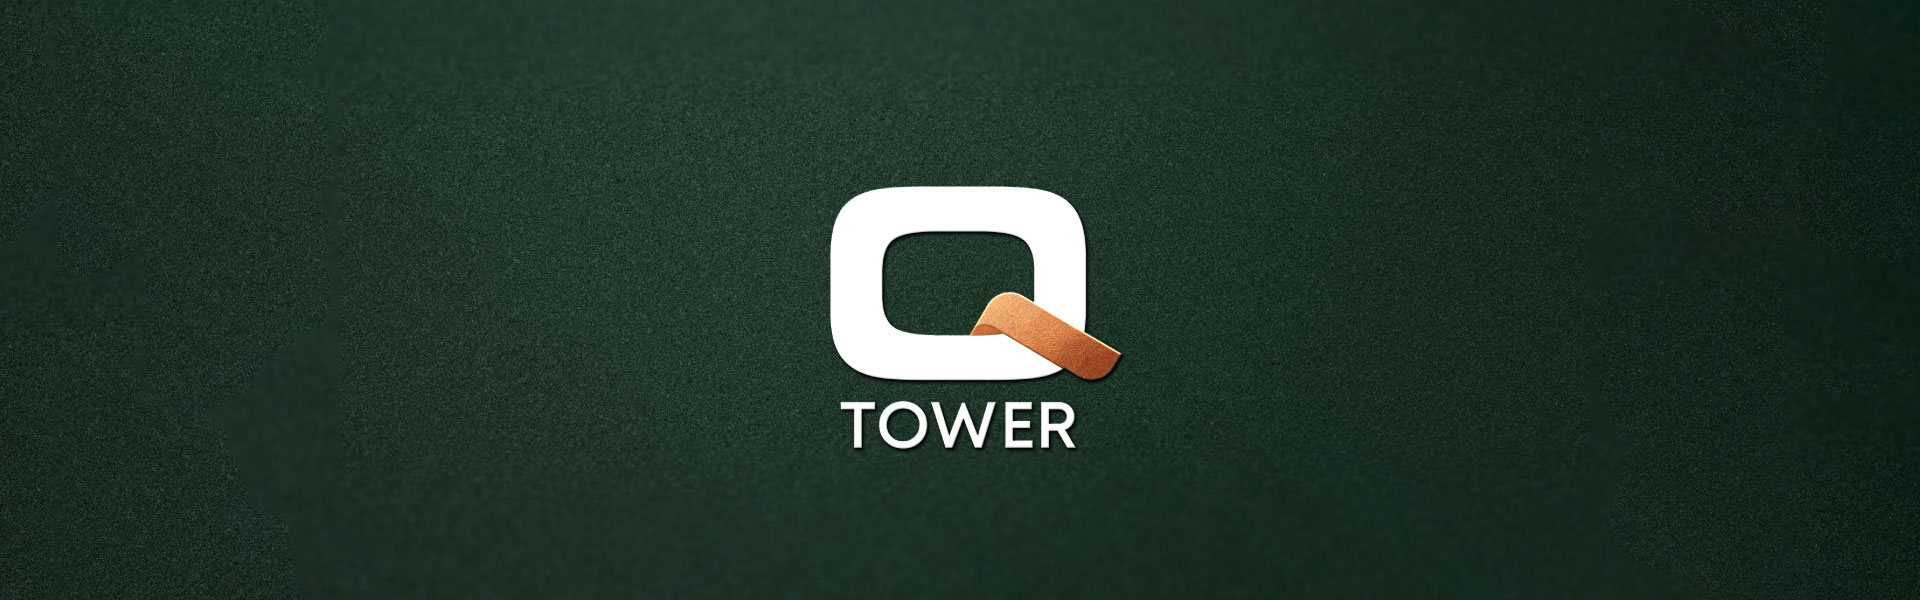 q-tower-brand-logo-design-by-mapleweb-vancouver-canada-header-image